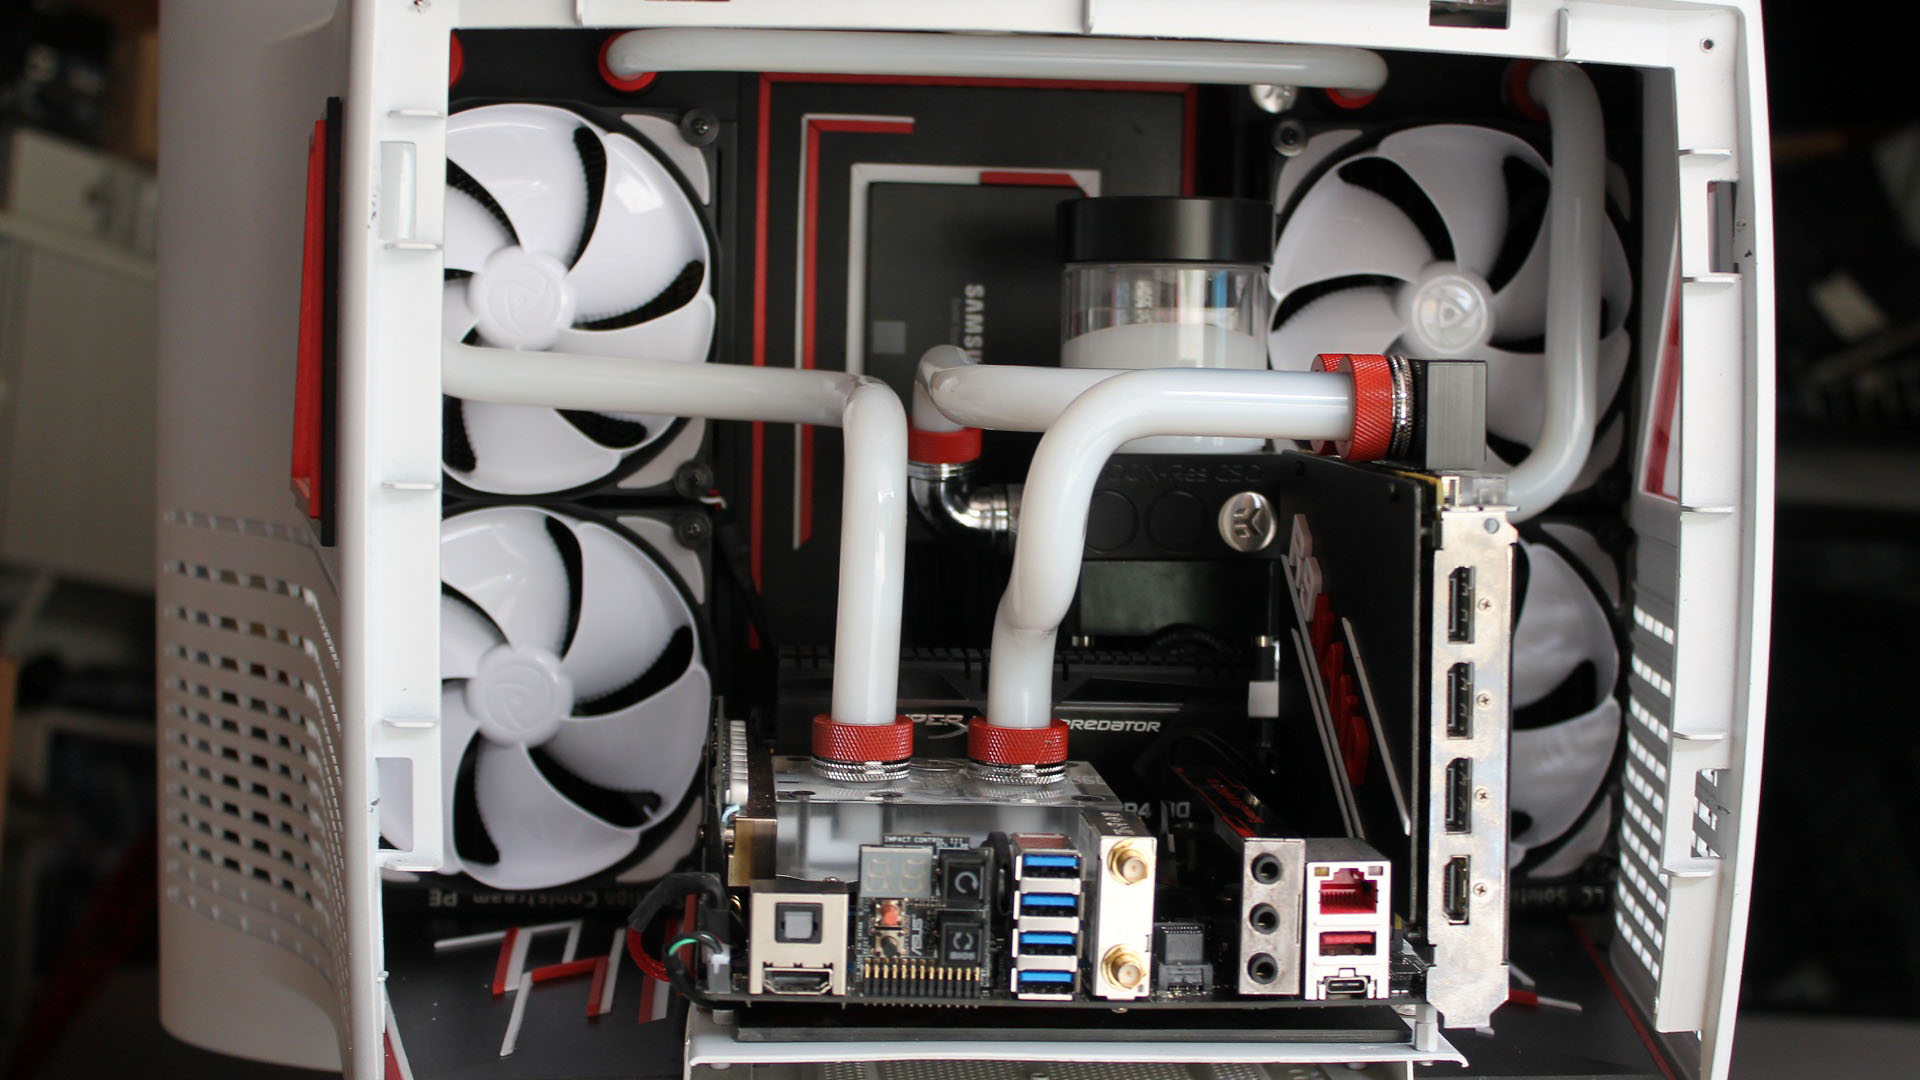 The watercooled components inside the CRT gaming PC 